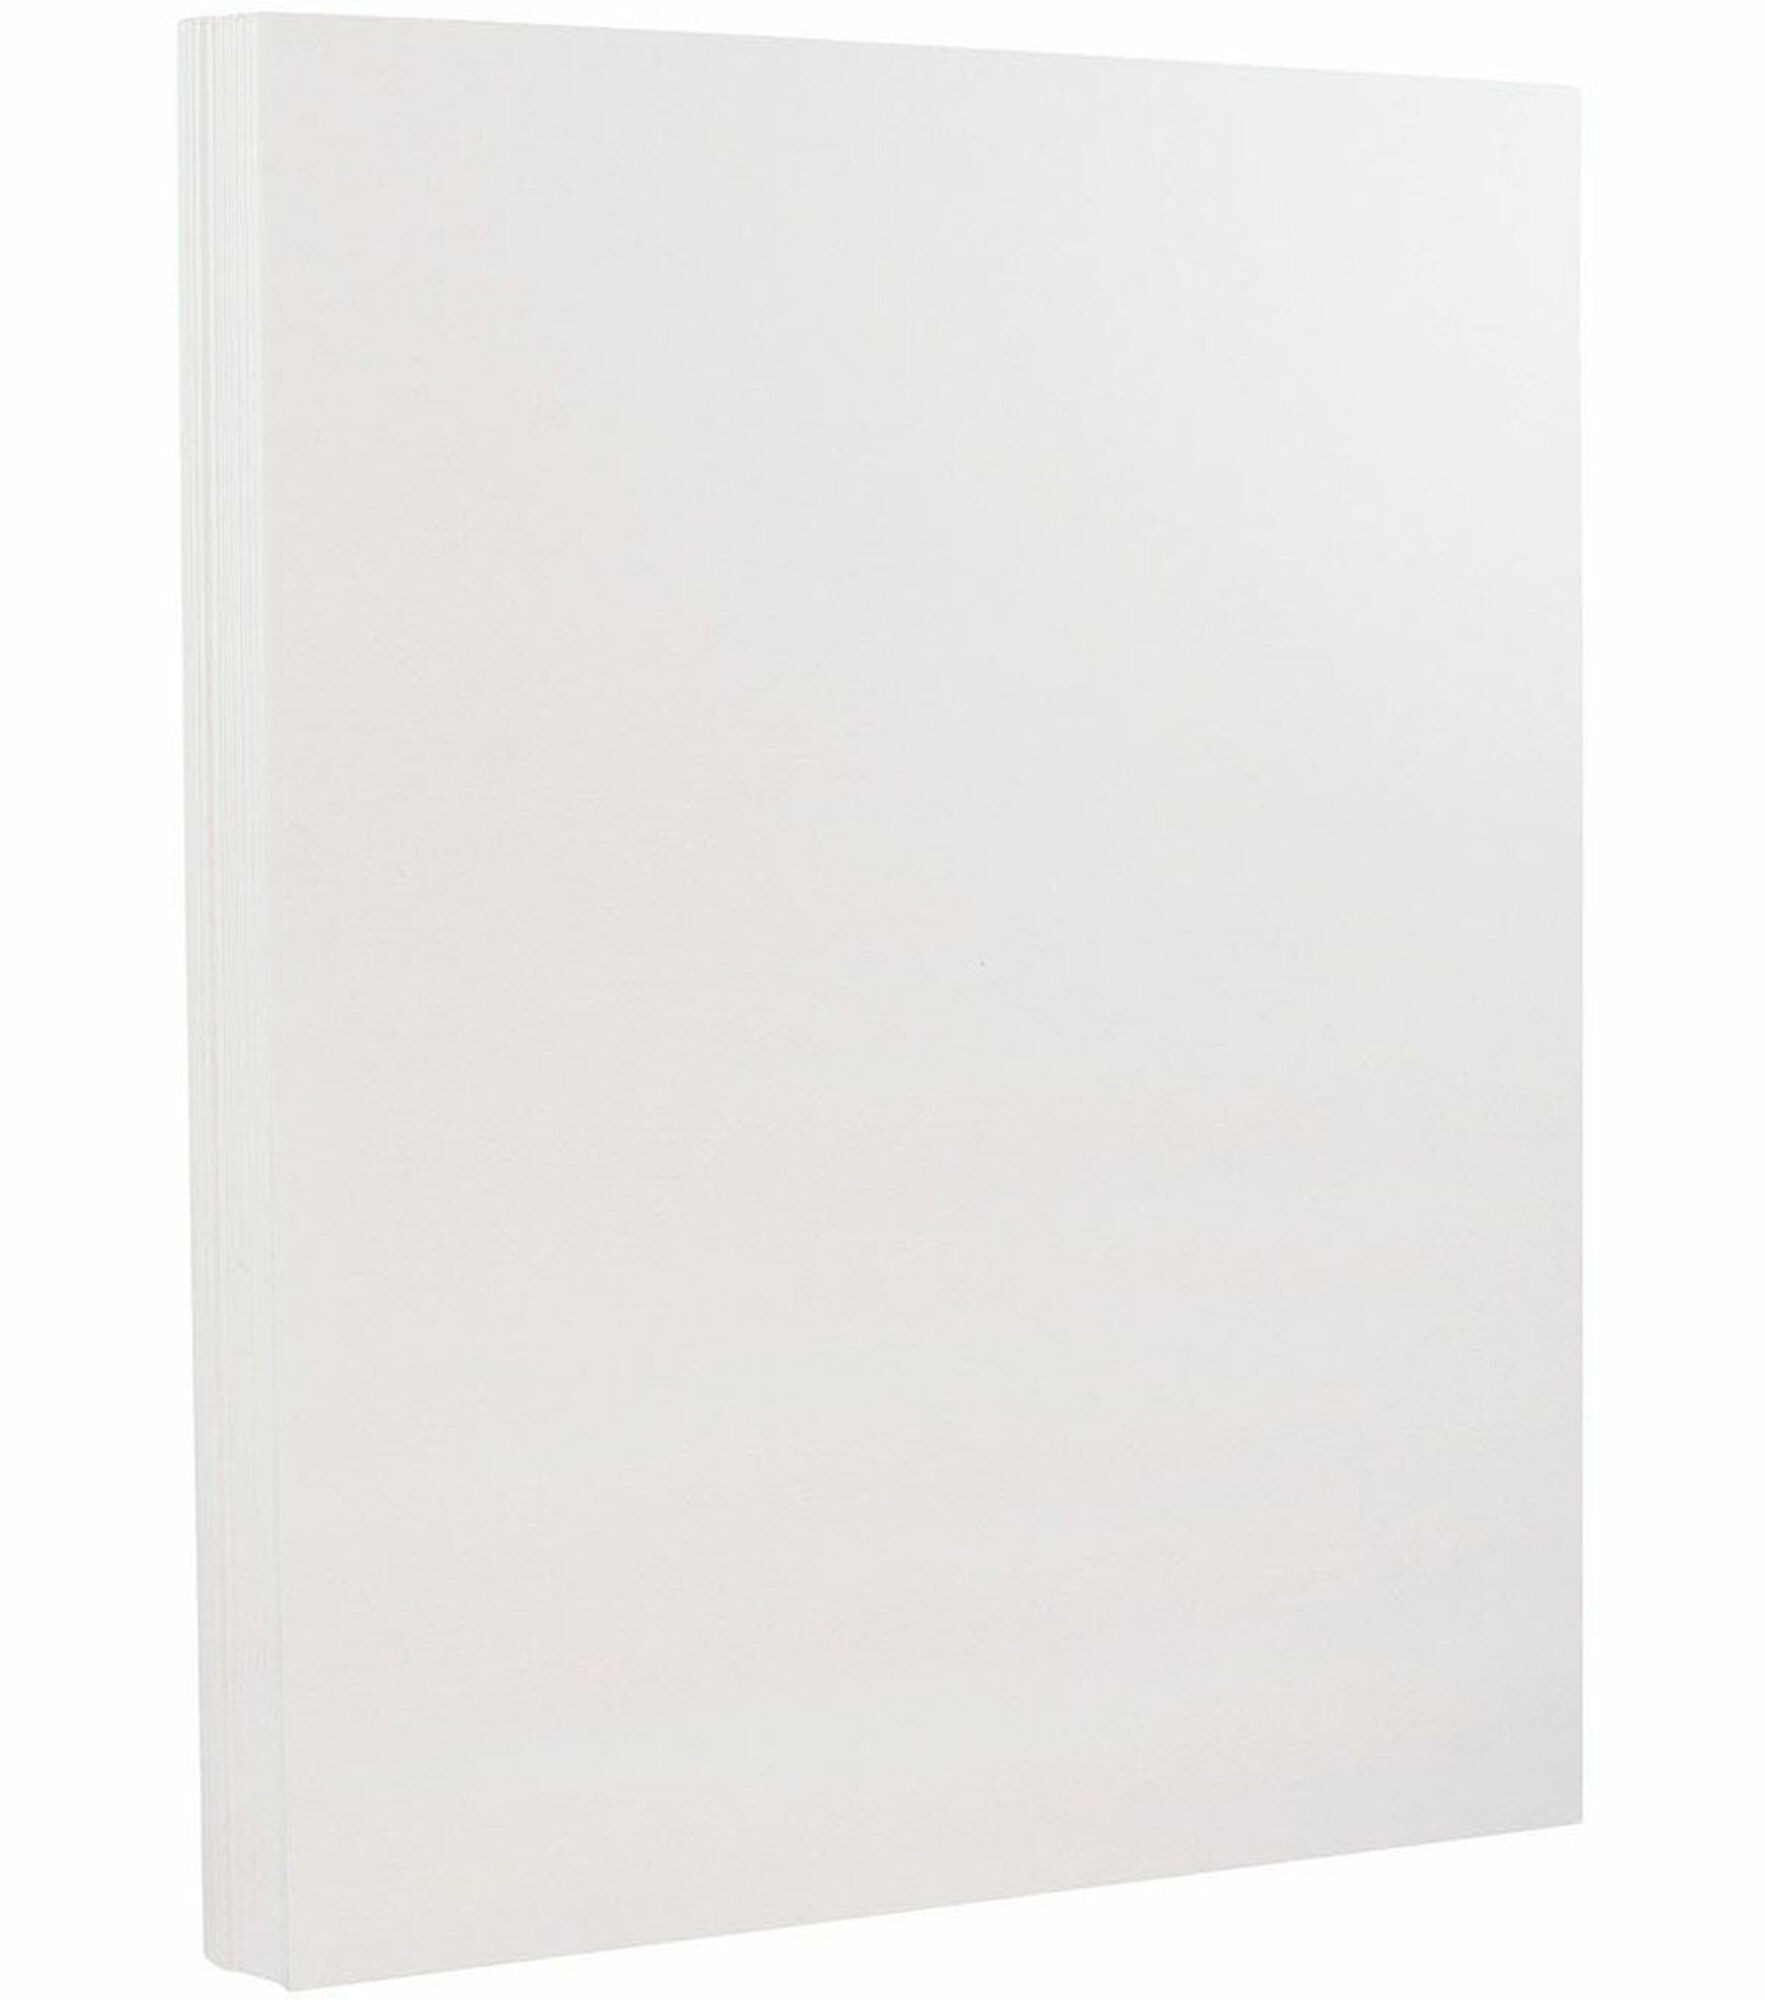 Basic WHITE (Standard) Card Stock Paper - 8.5 x 11 - 80lb Cover (216gsm) 